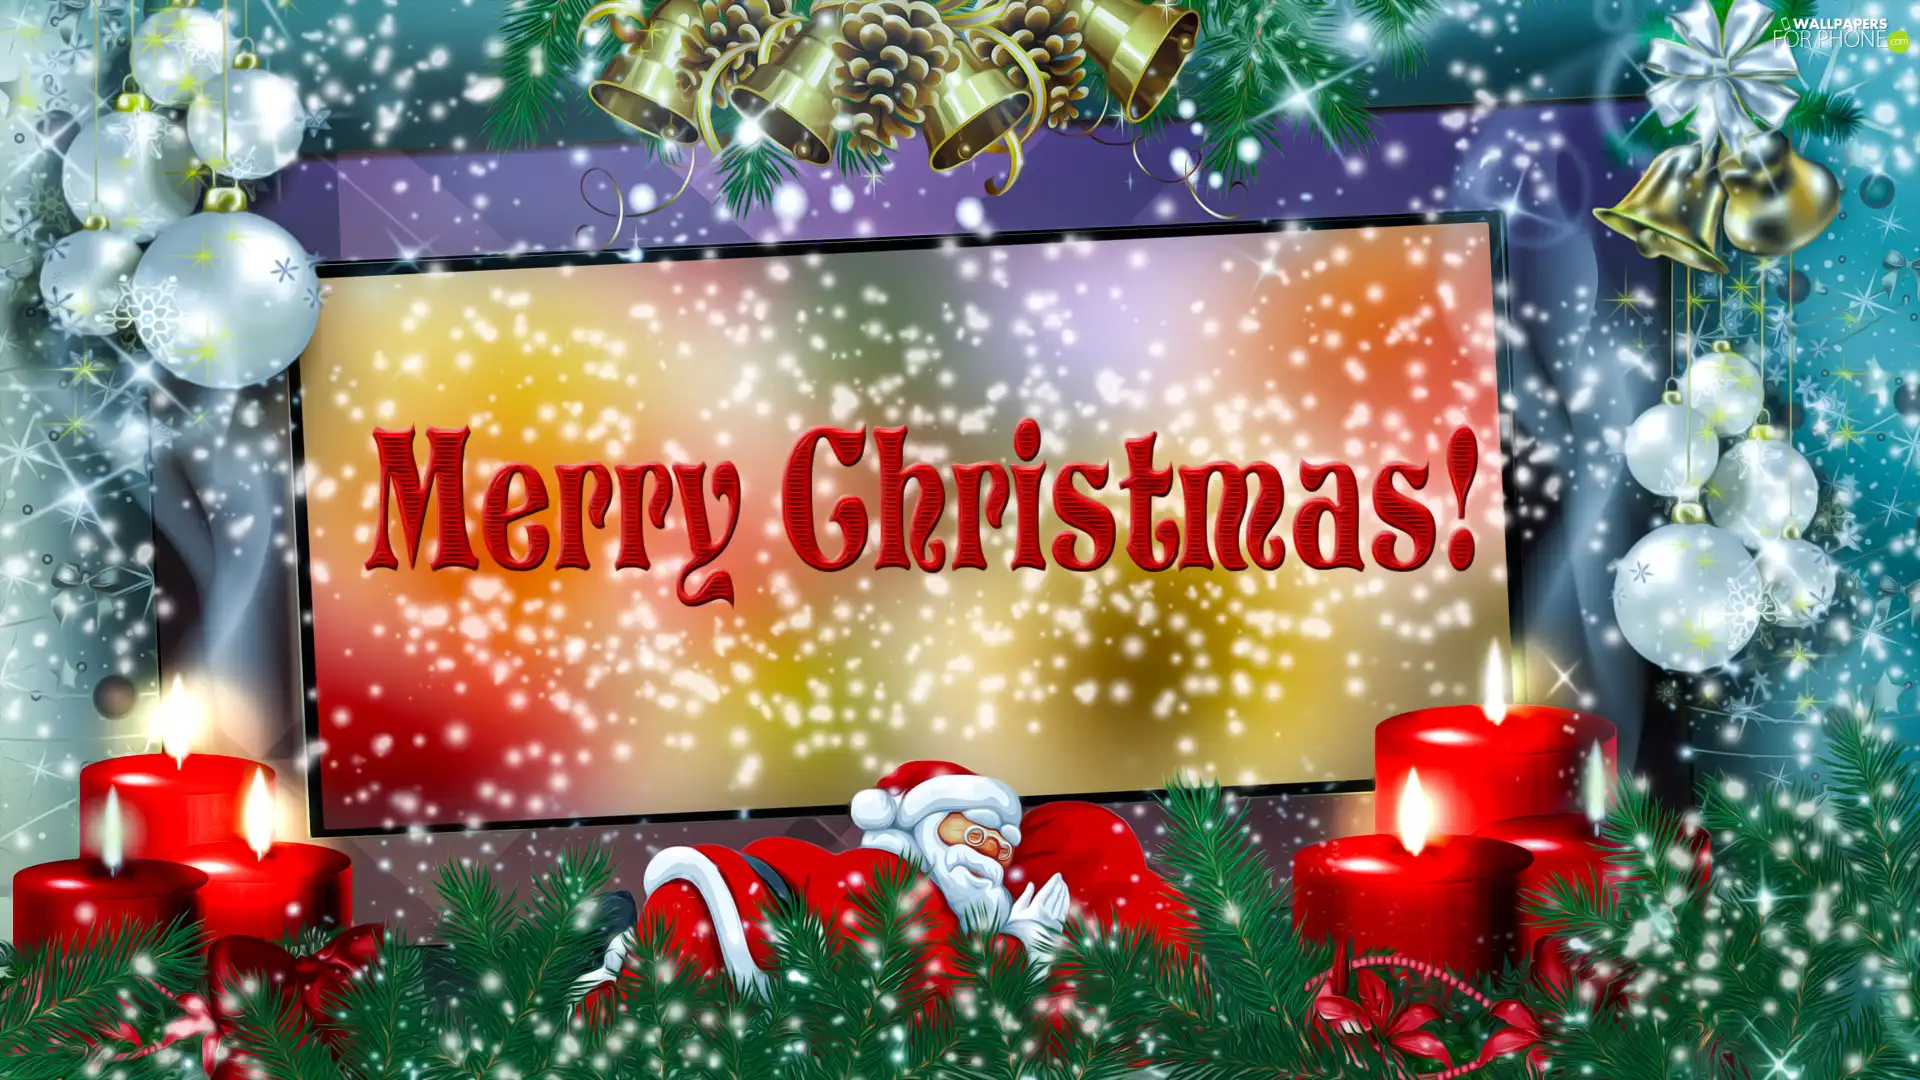 Candles, Christmas, Wishes, Santa, graphics, baubles, ##